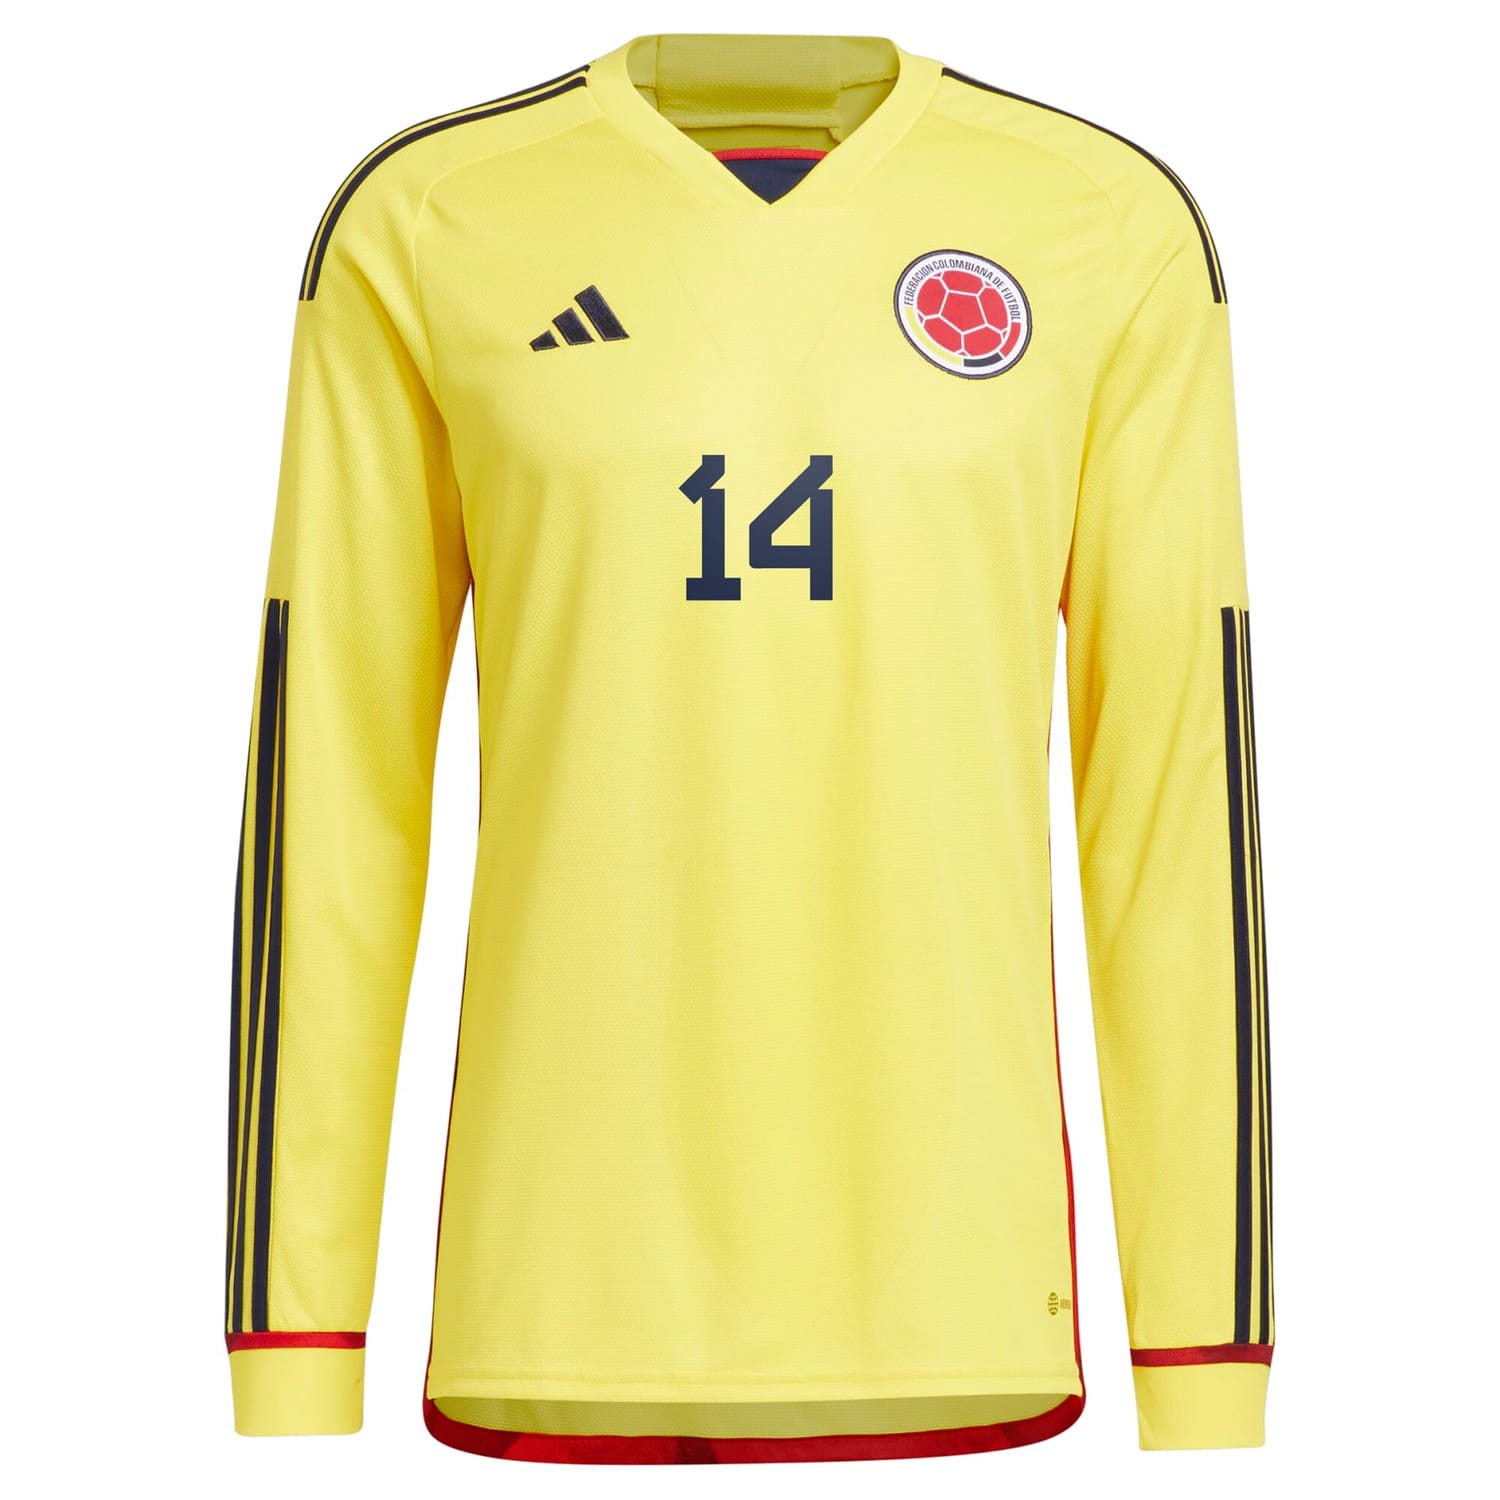 Colombia National Team Home Jersey Shirt Long Sleeve Yellow 2022-23 player Luis Diaz printing for Men